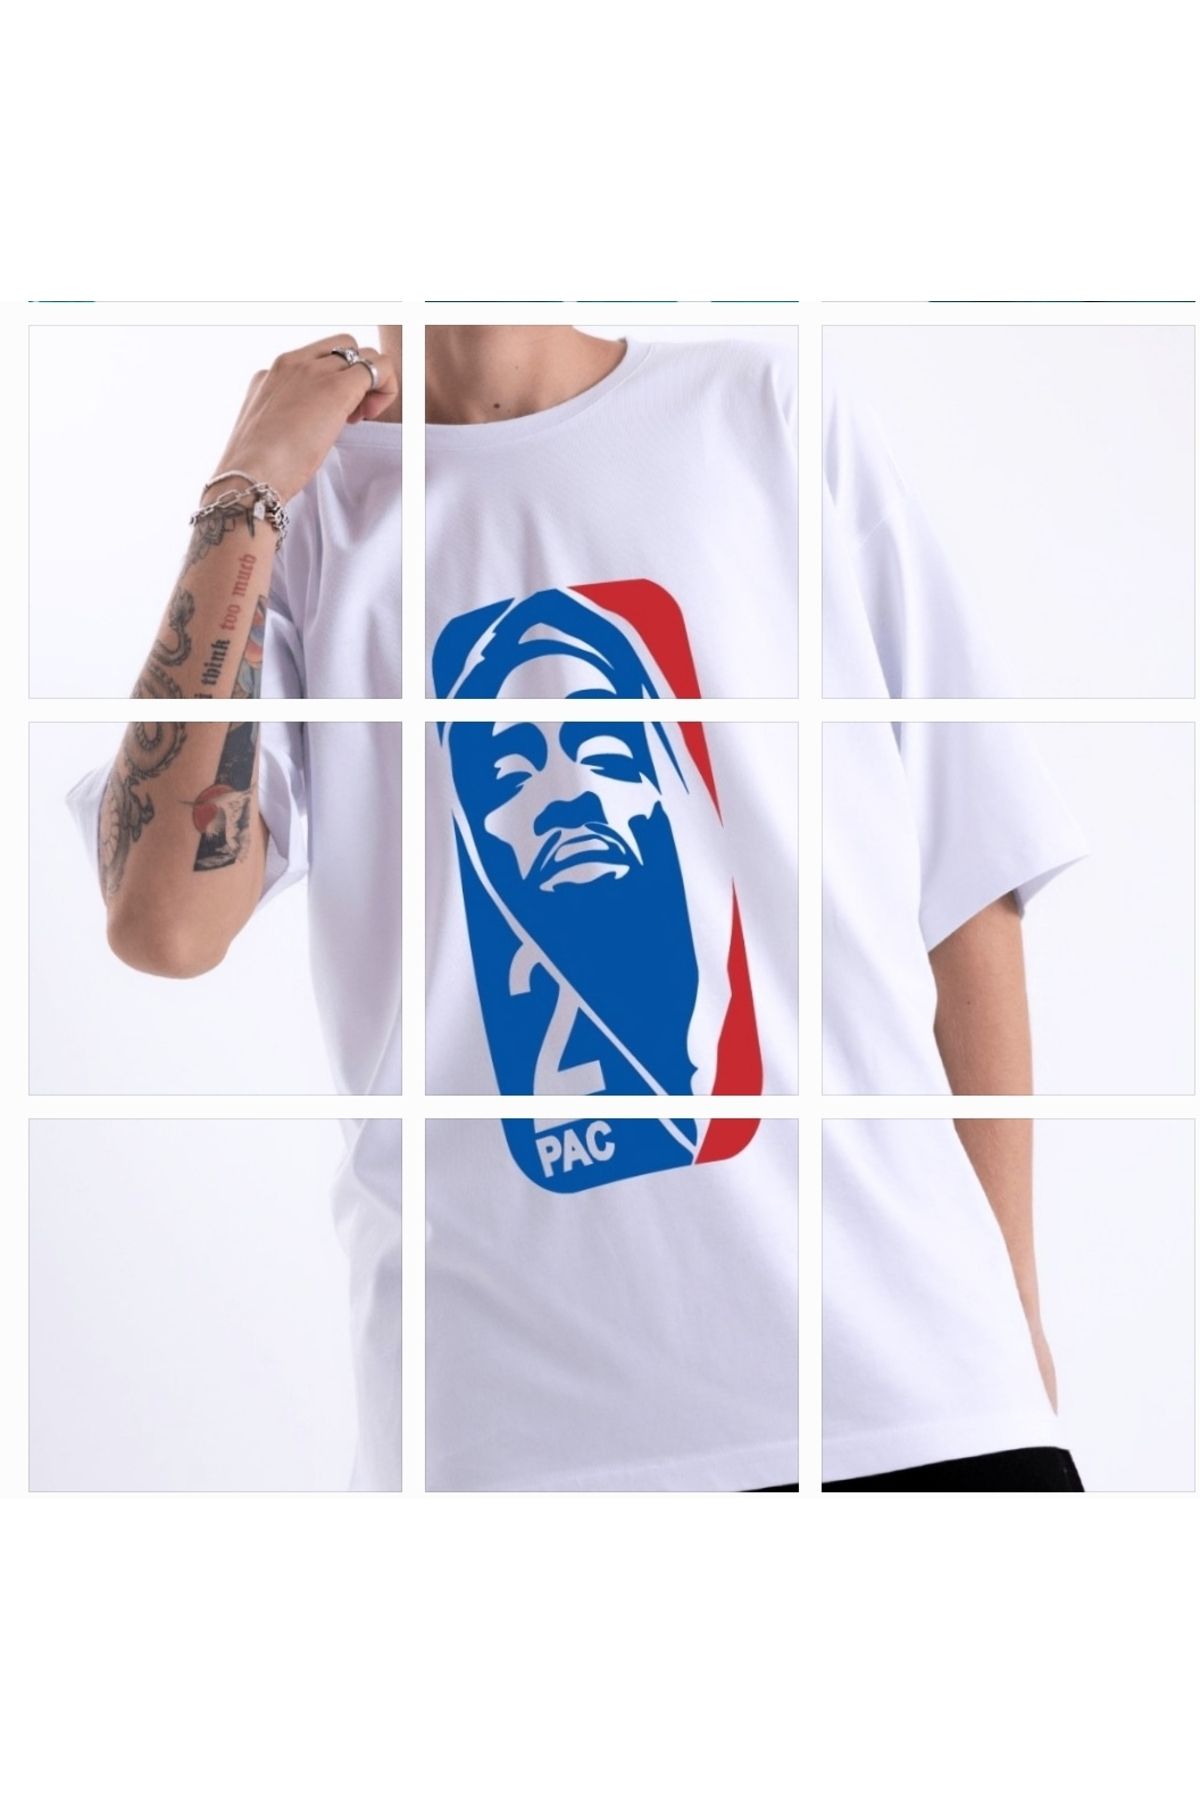 PullTheHood Unisex ( Twopac ) Hiphop 2pac Oversize Tshirt Oversize